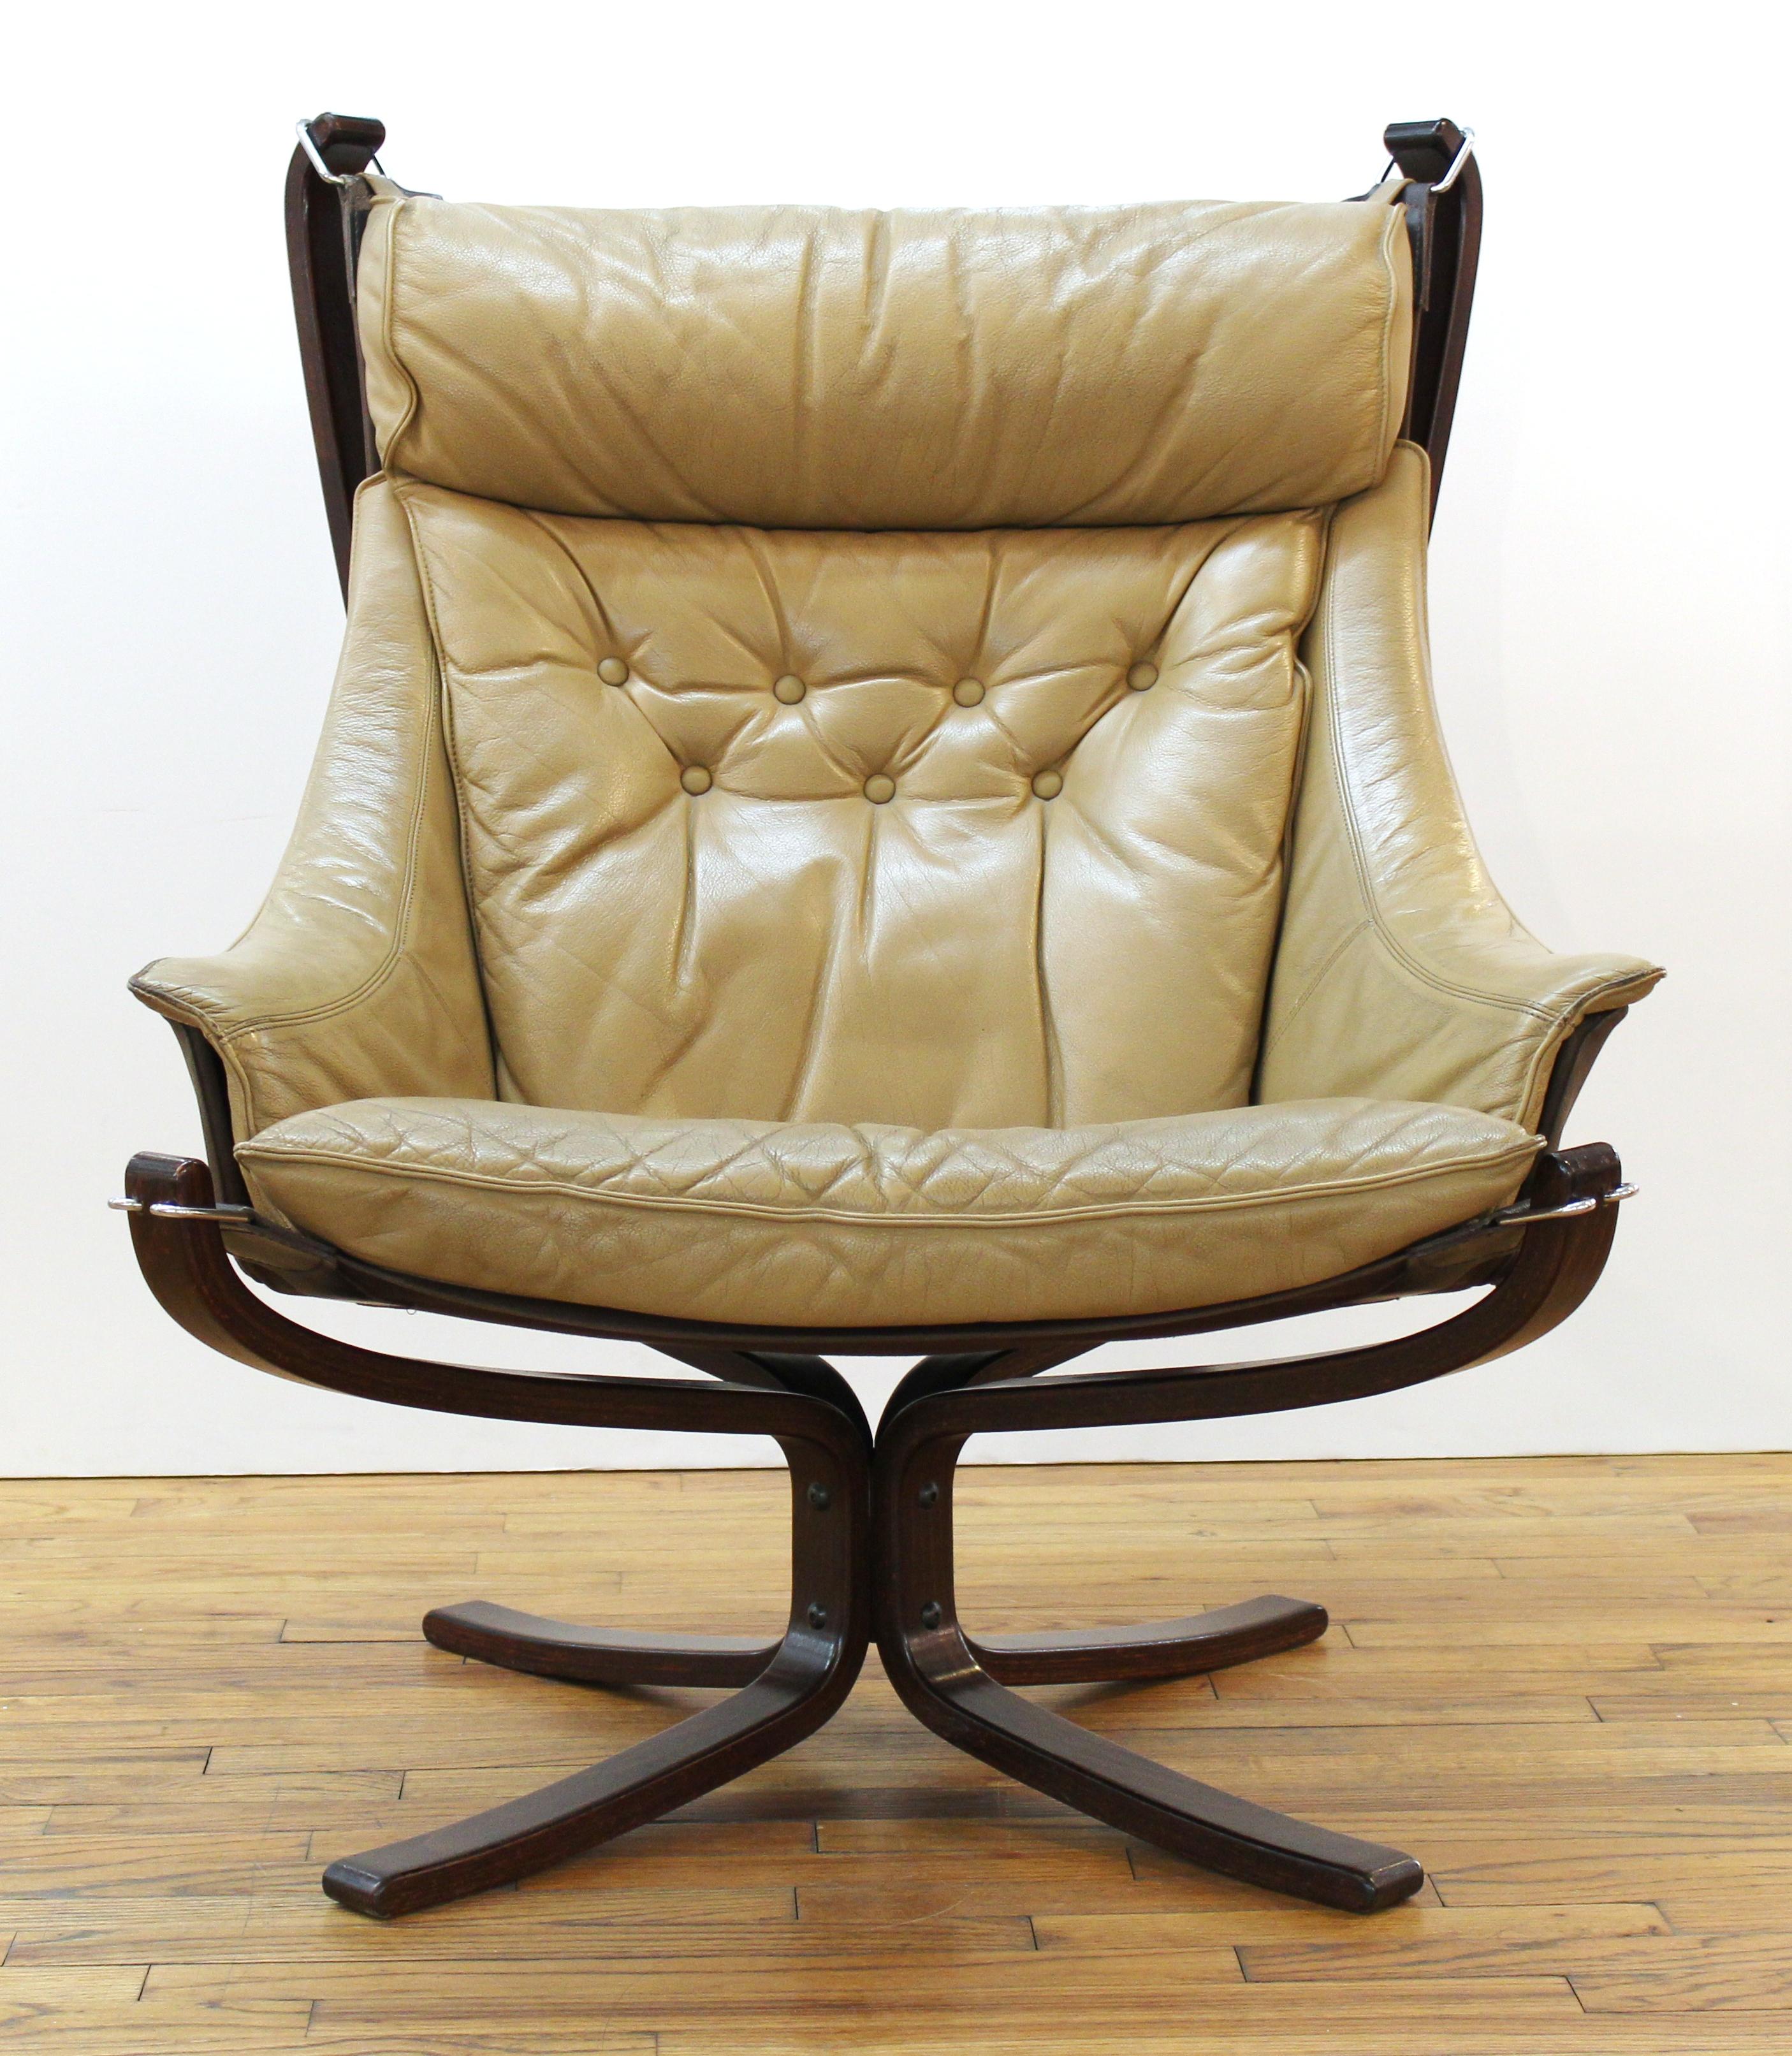 Sigurd Ressell for Vatne Mobler Scandinavian Mid-Century Modern 'Viking' lounge chair with Poltrona Frau leather upholstery, circa 1980. Makers label on the bottom.